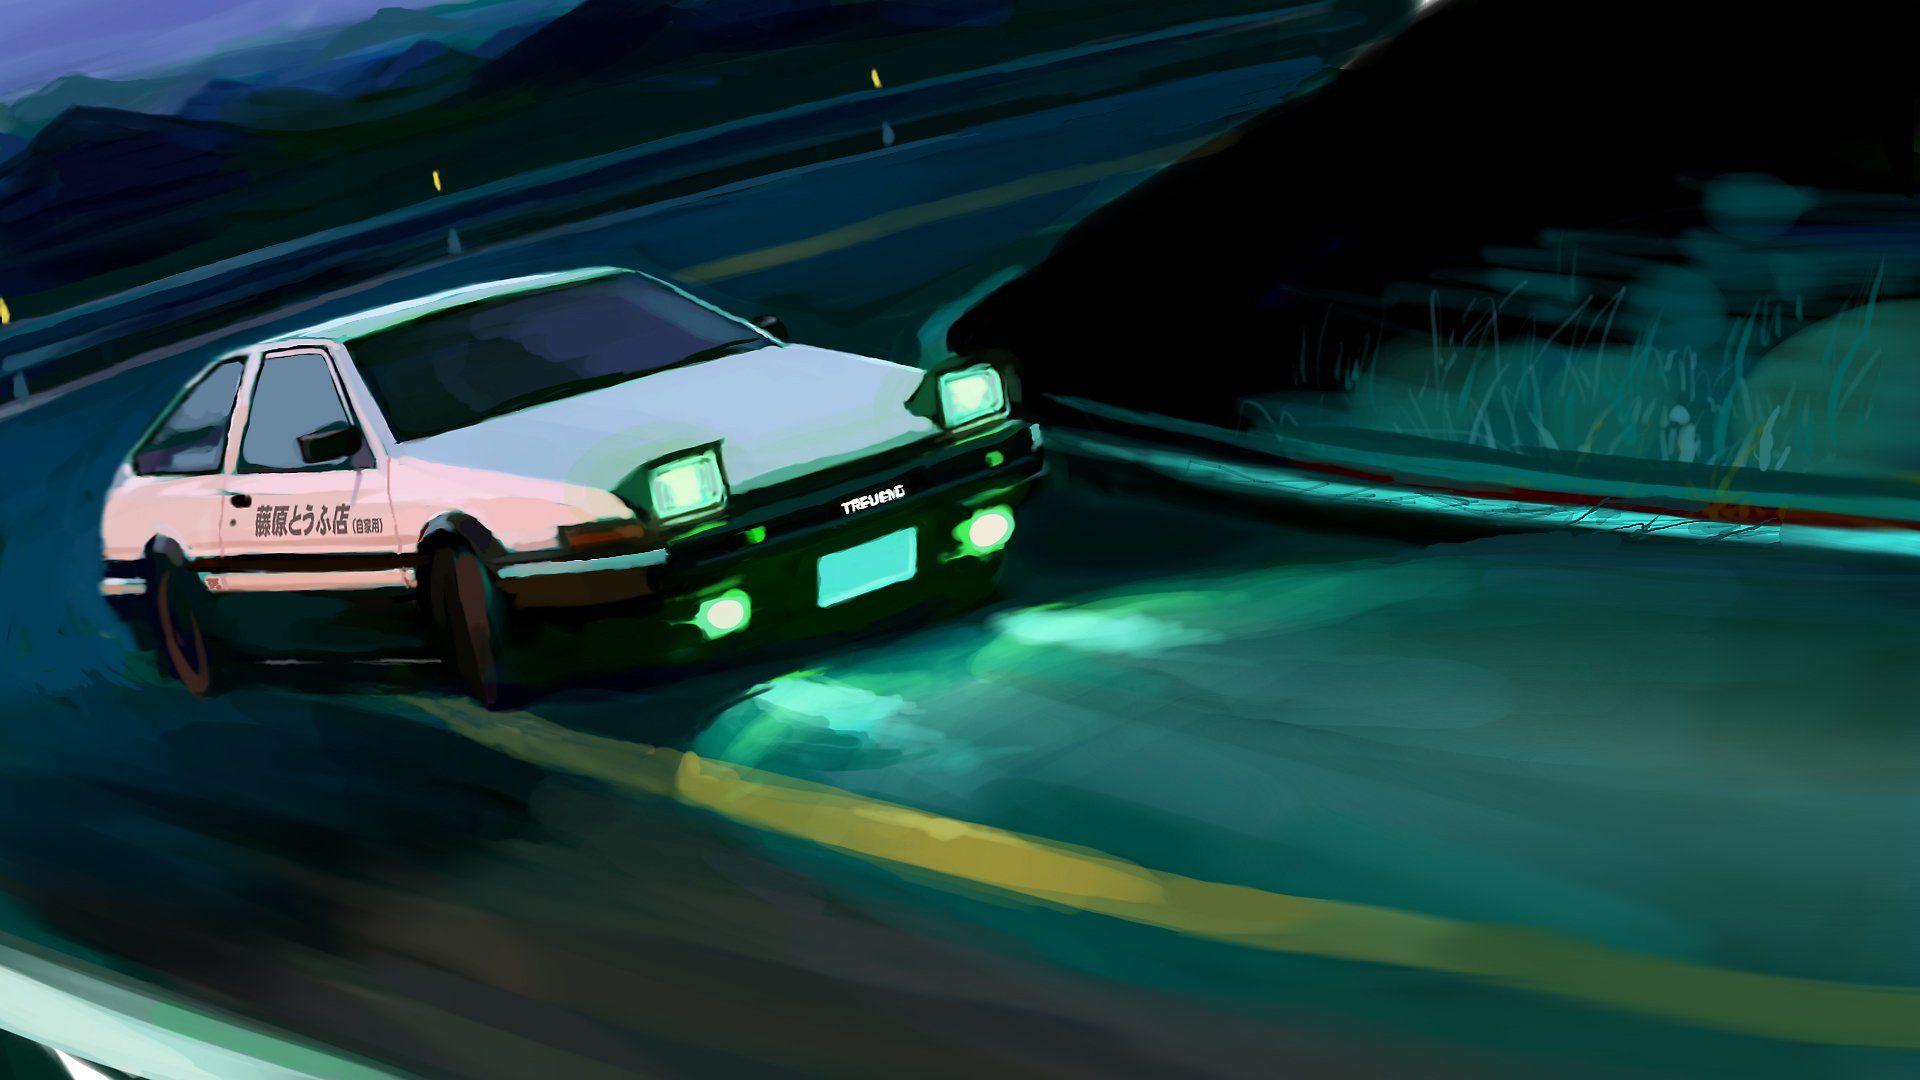 Anime Initial D Final Stage Toyota AE86 Toyota Trueno Wallpaper. Jdm wallpaper, Initial d car, Initial d